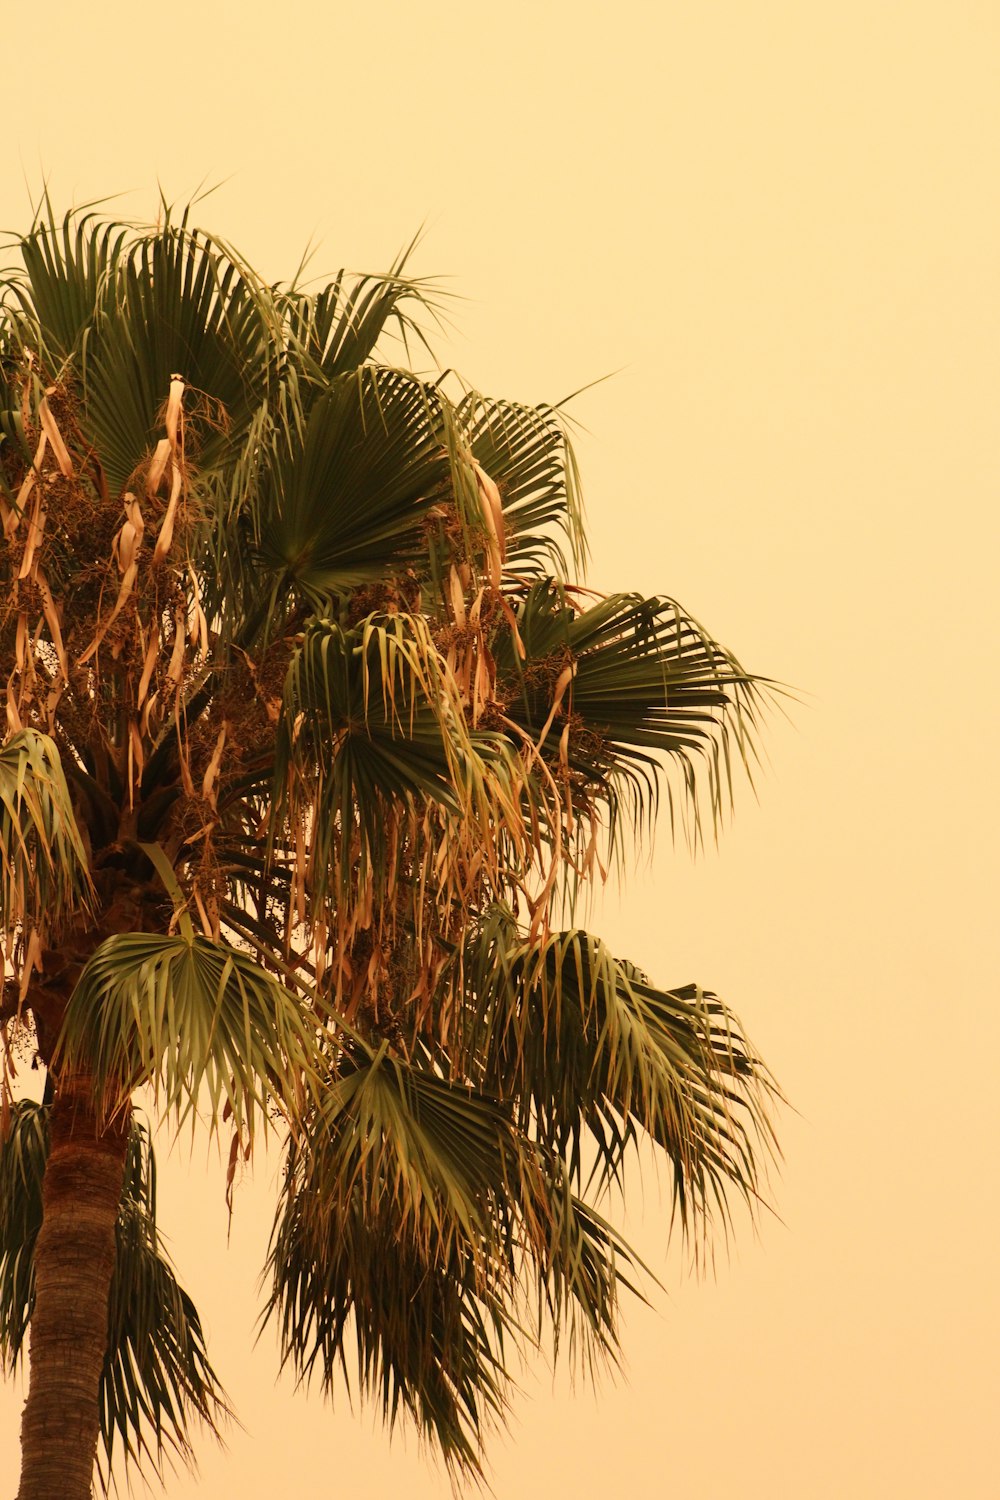 a palm tree with a yellow sky in the background